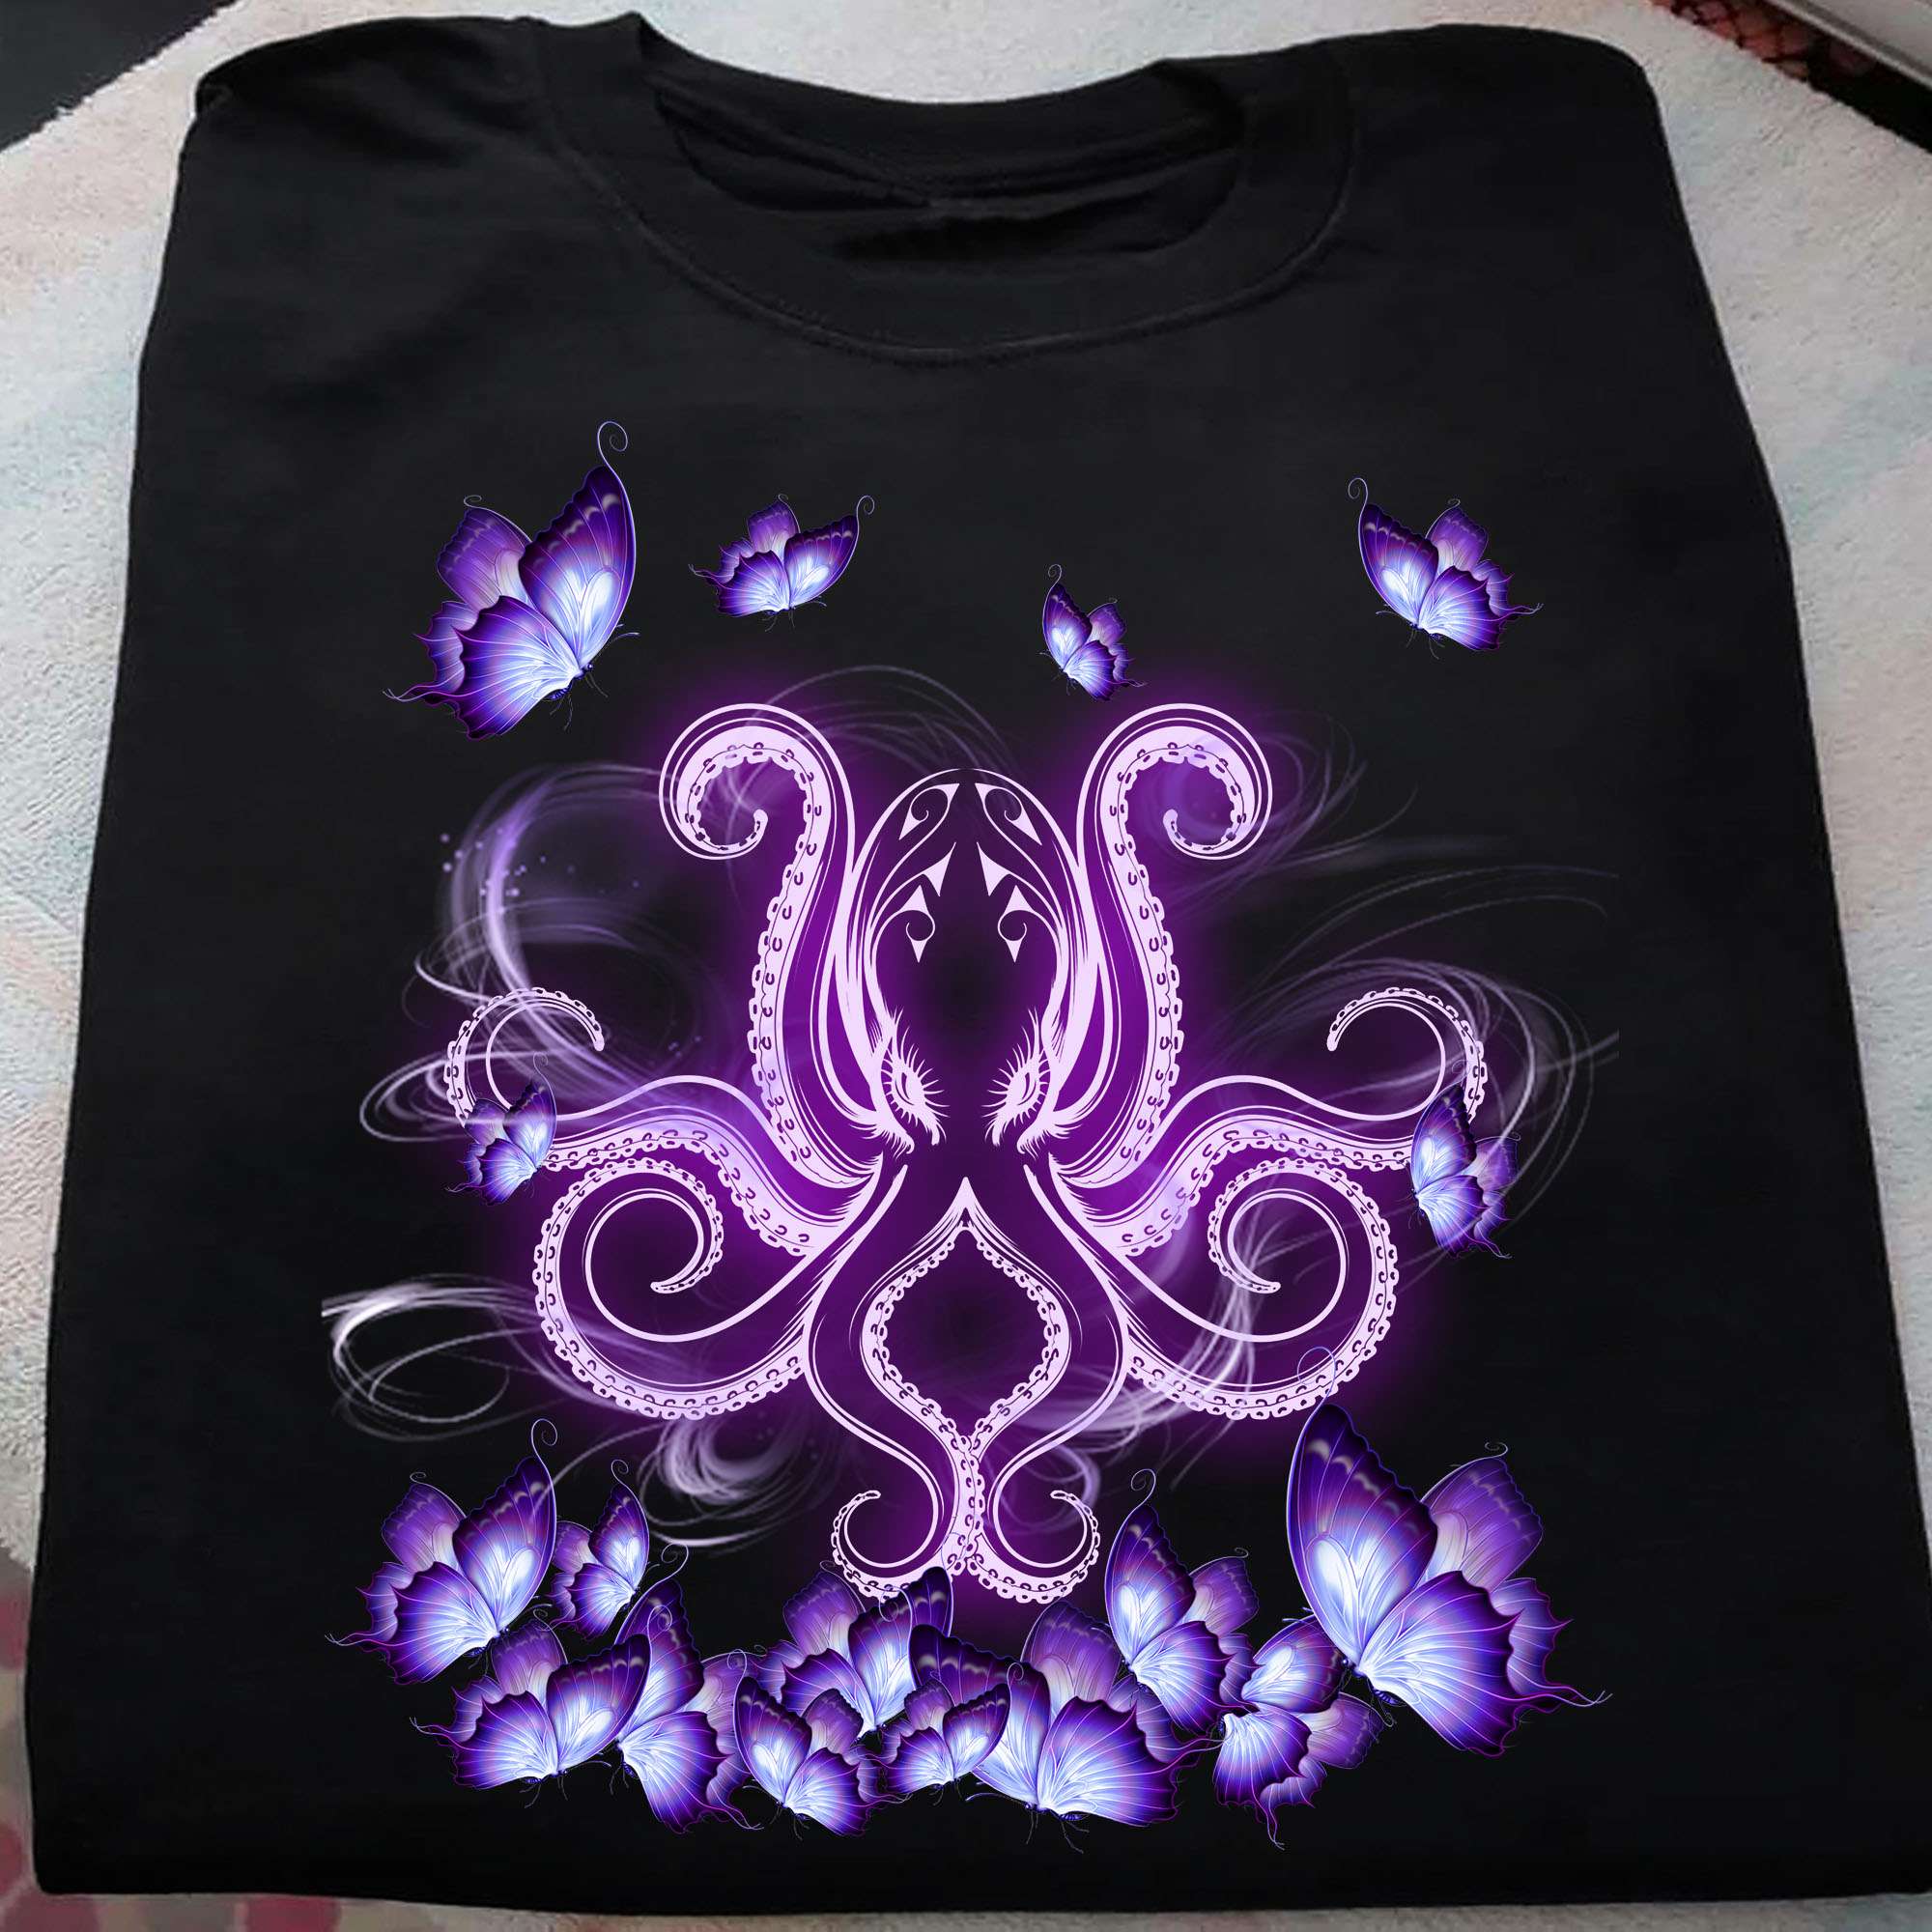 Octopus and butterflies - Octopus lover, animal lover